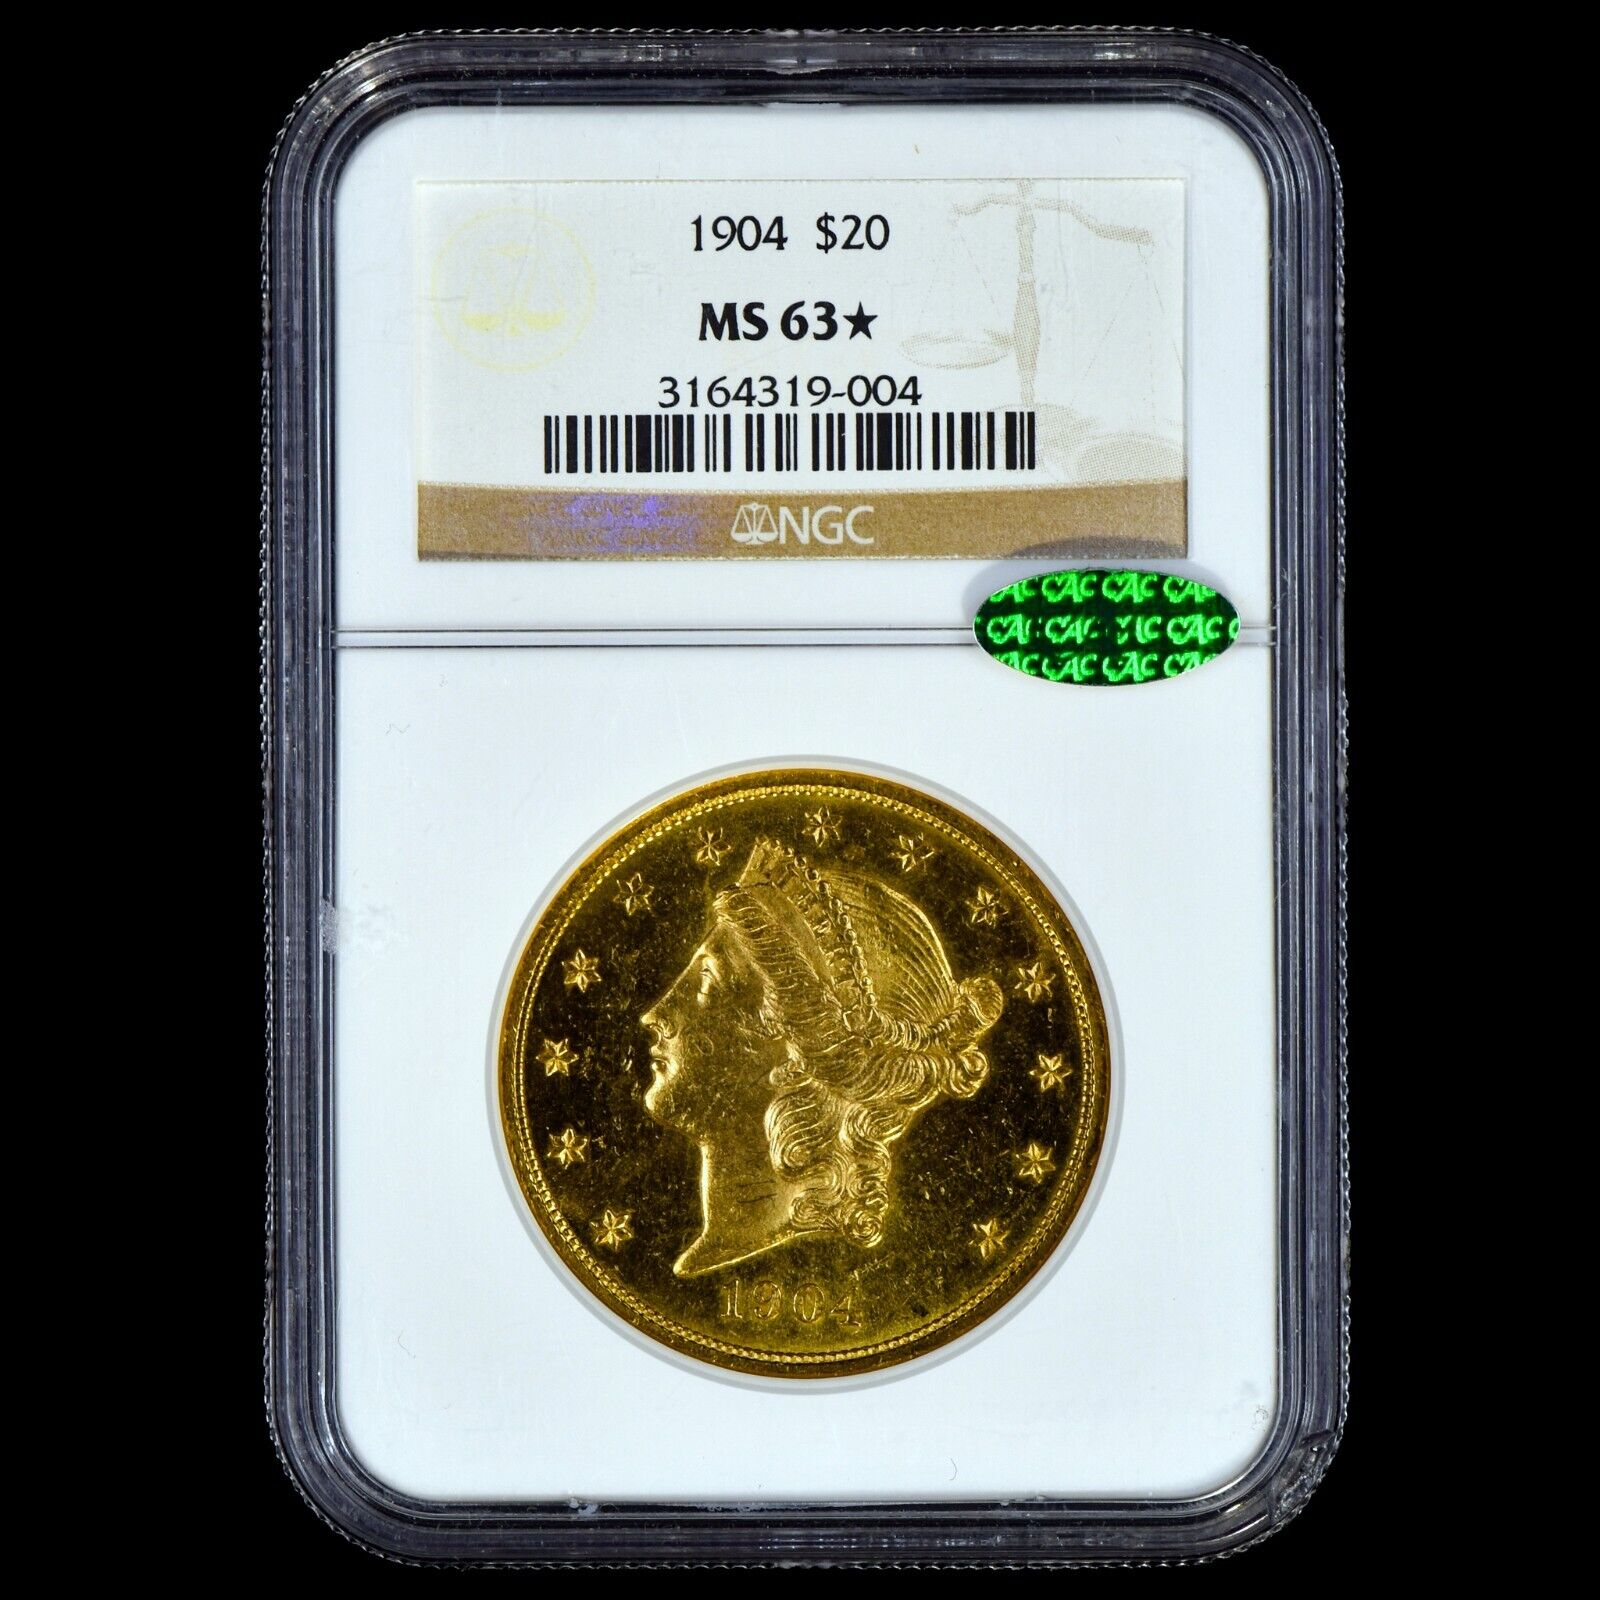 1904 $20 GOLD LIBERTY ✪ NGC MS-63 STAR CAC ✪ PL PROOF-LIKE COIN CHOICE ◢TRUSTED◣